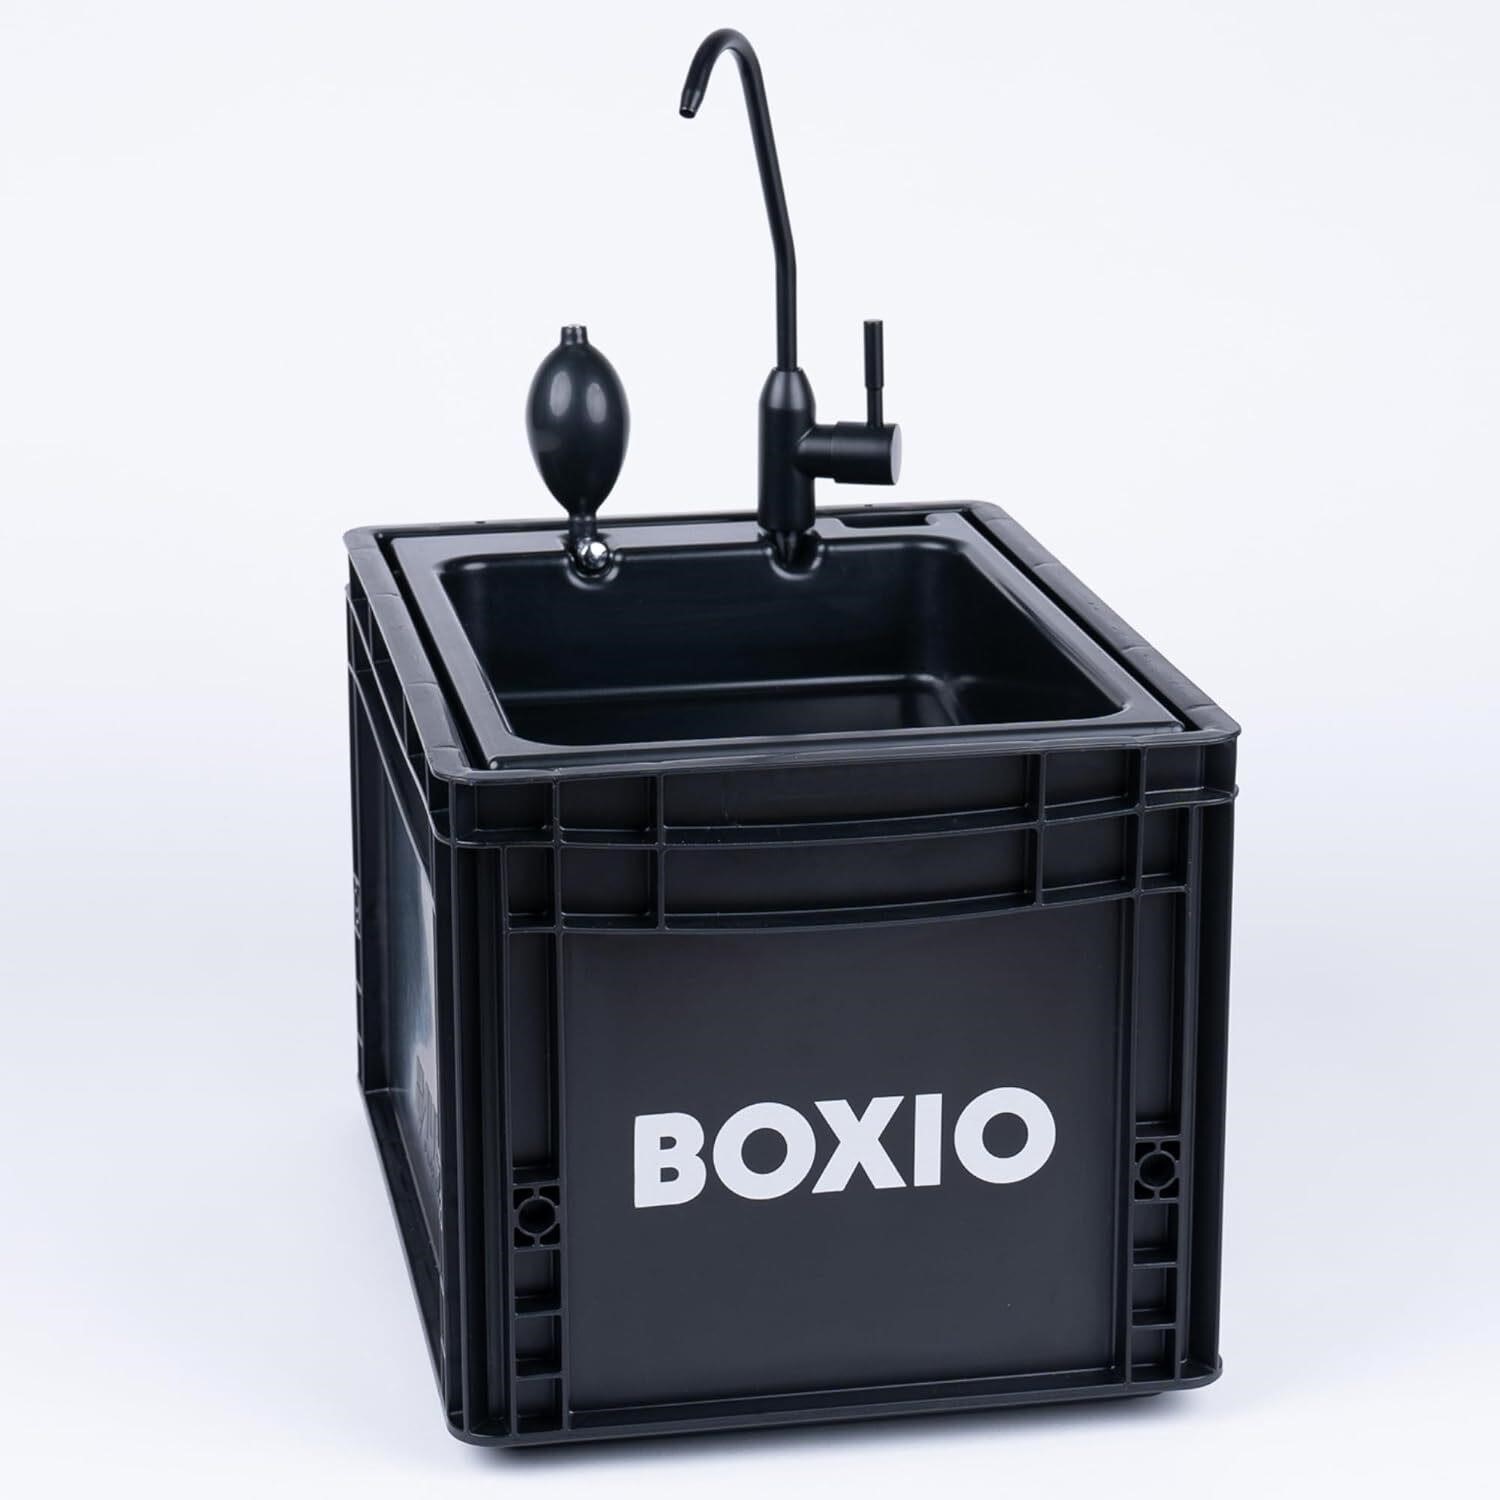 BOXIO - Portable Sink: Compact for Camping